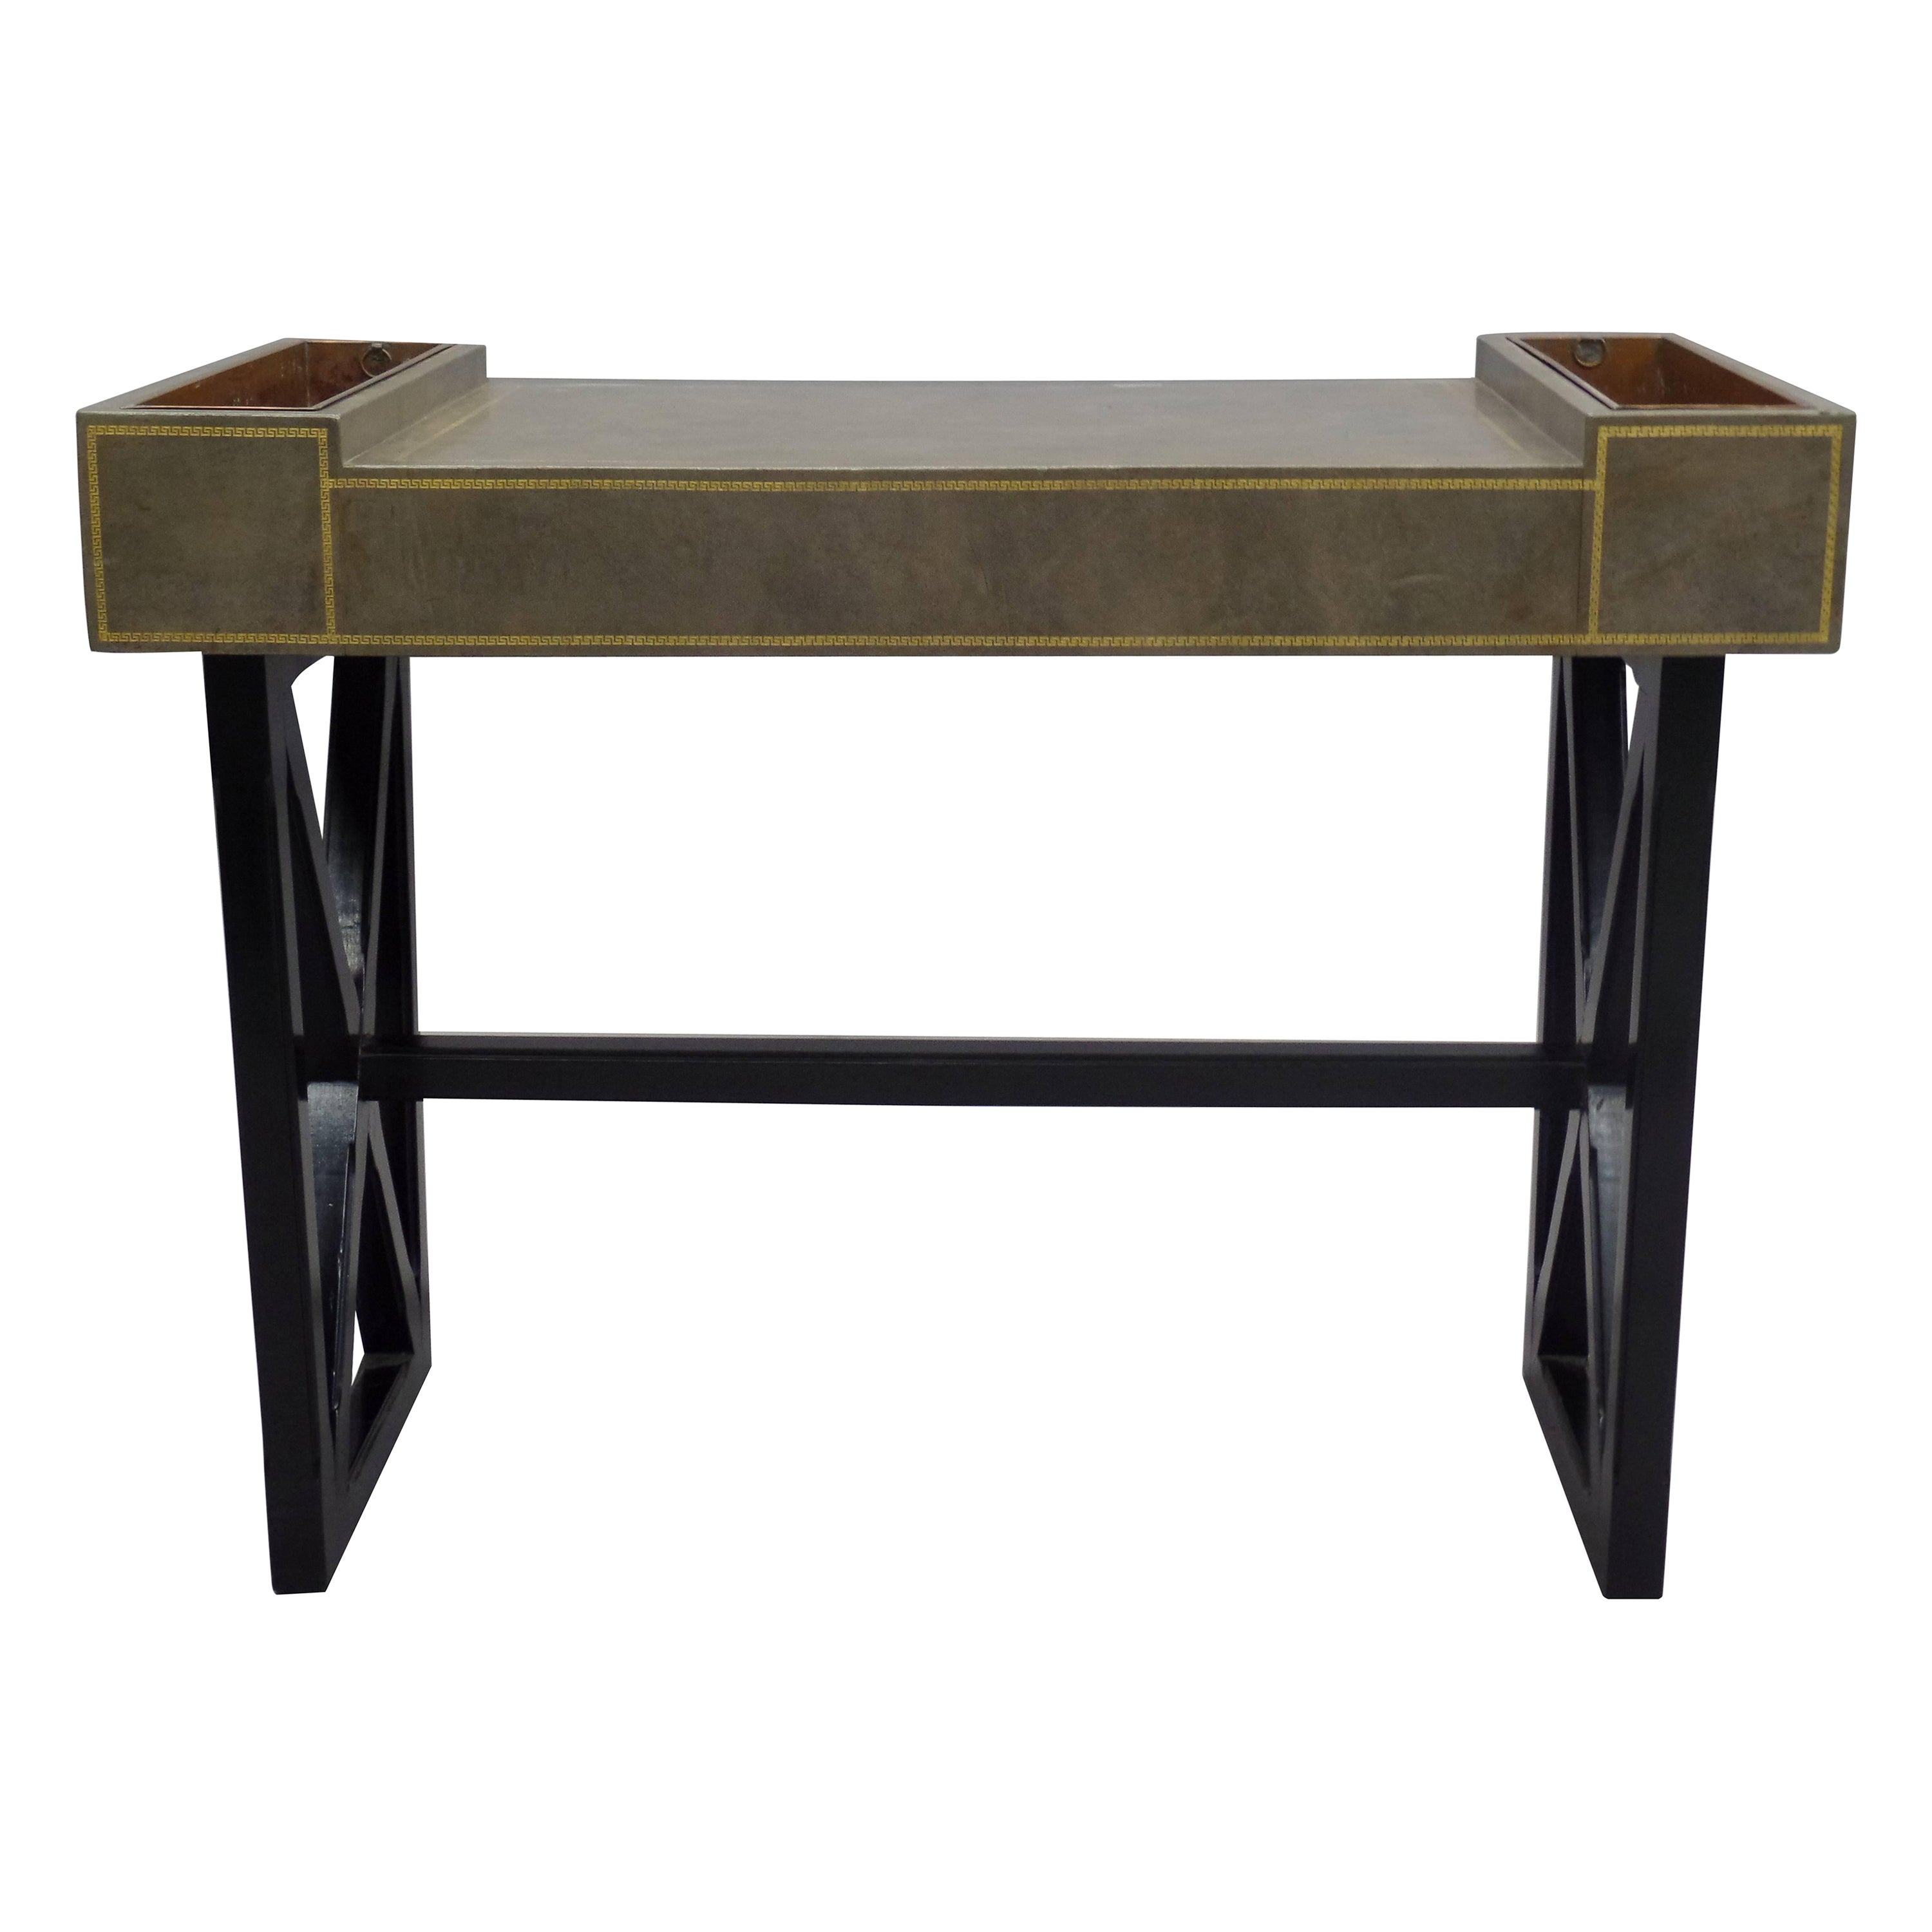 French Modern Neoclassical Ebony & Leather Desk /Writing Table, JeanMichel Frank For Sale